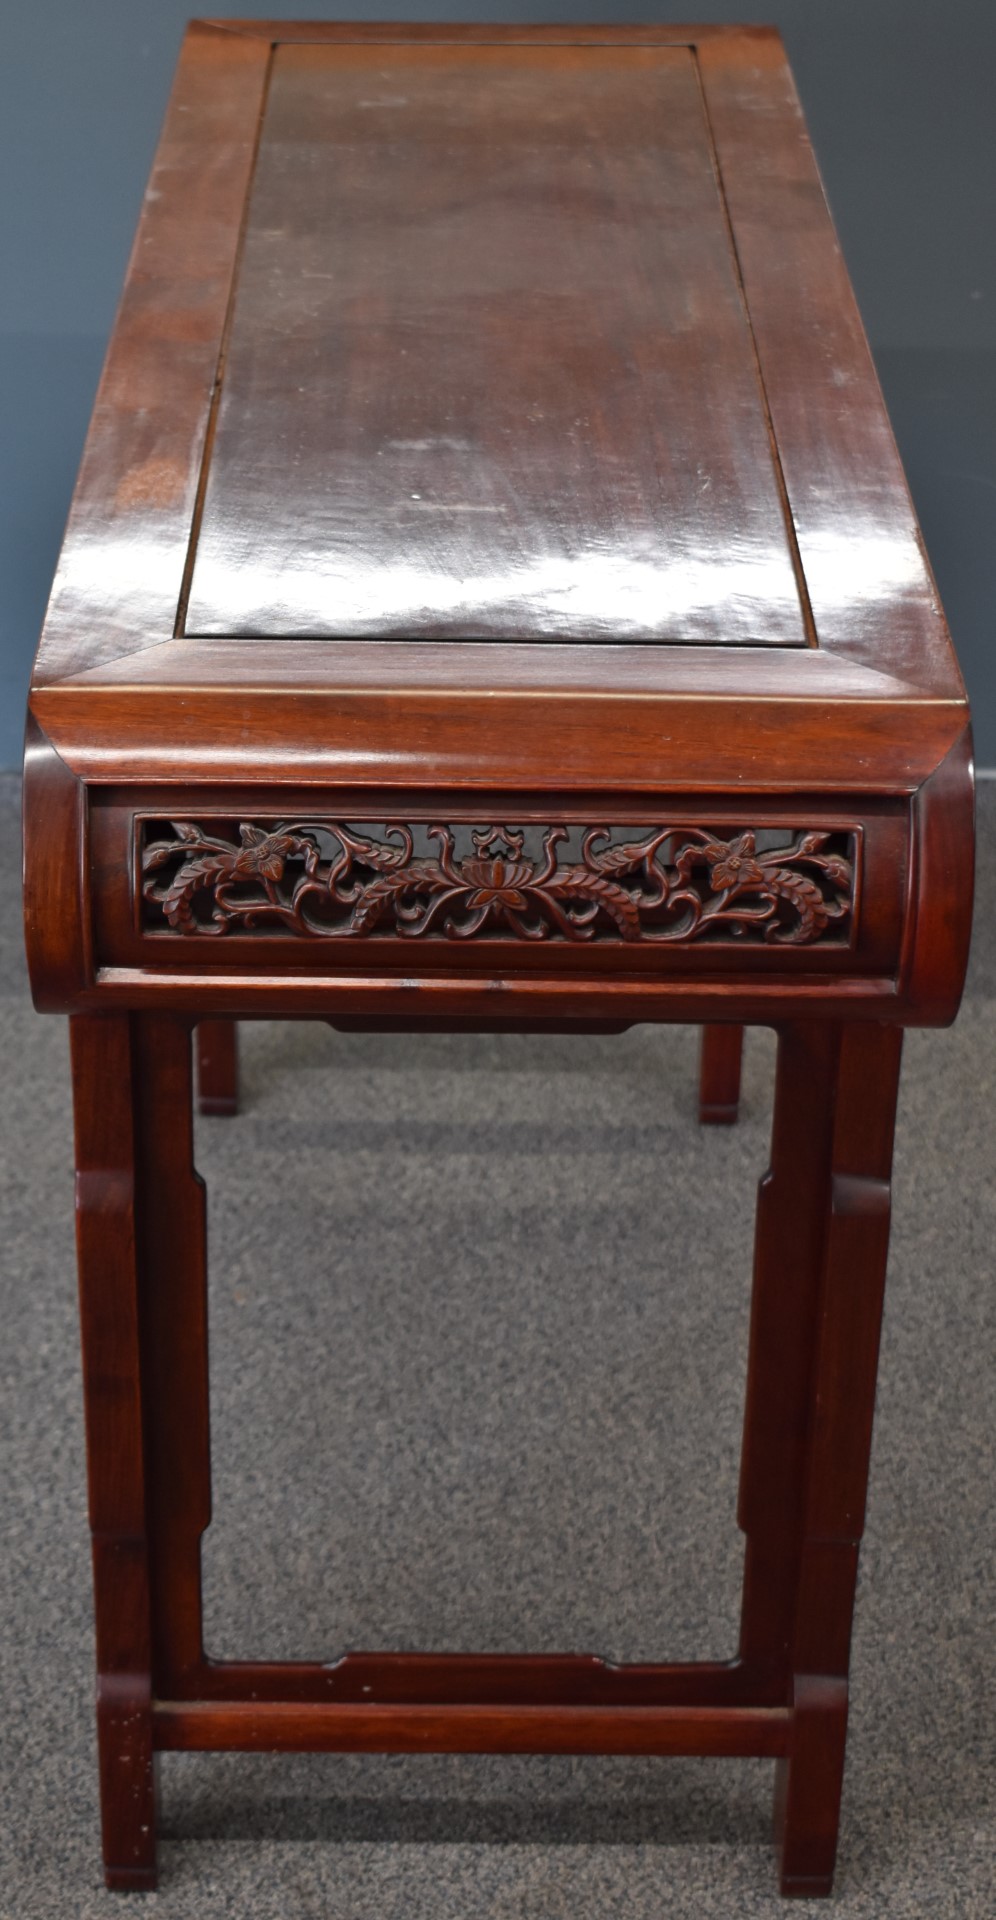 Carved oriental hardwood altar table with carved decoration, W127 x D43 x H83cm - Image 3 of 3